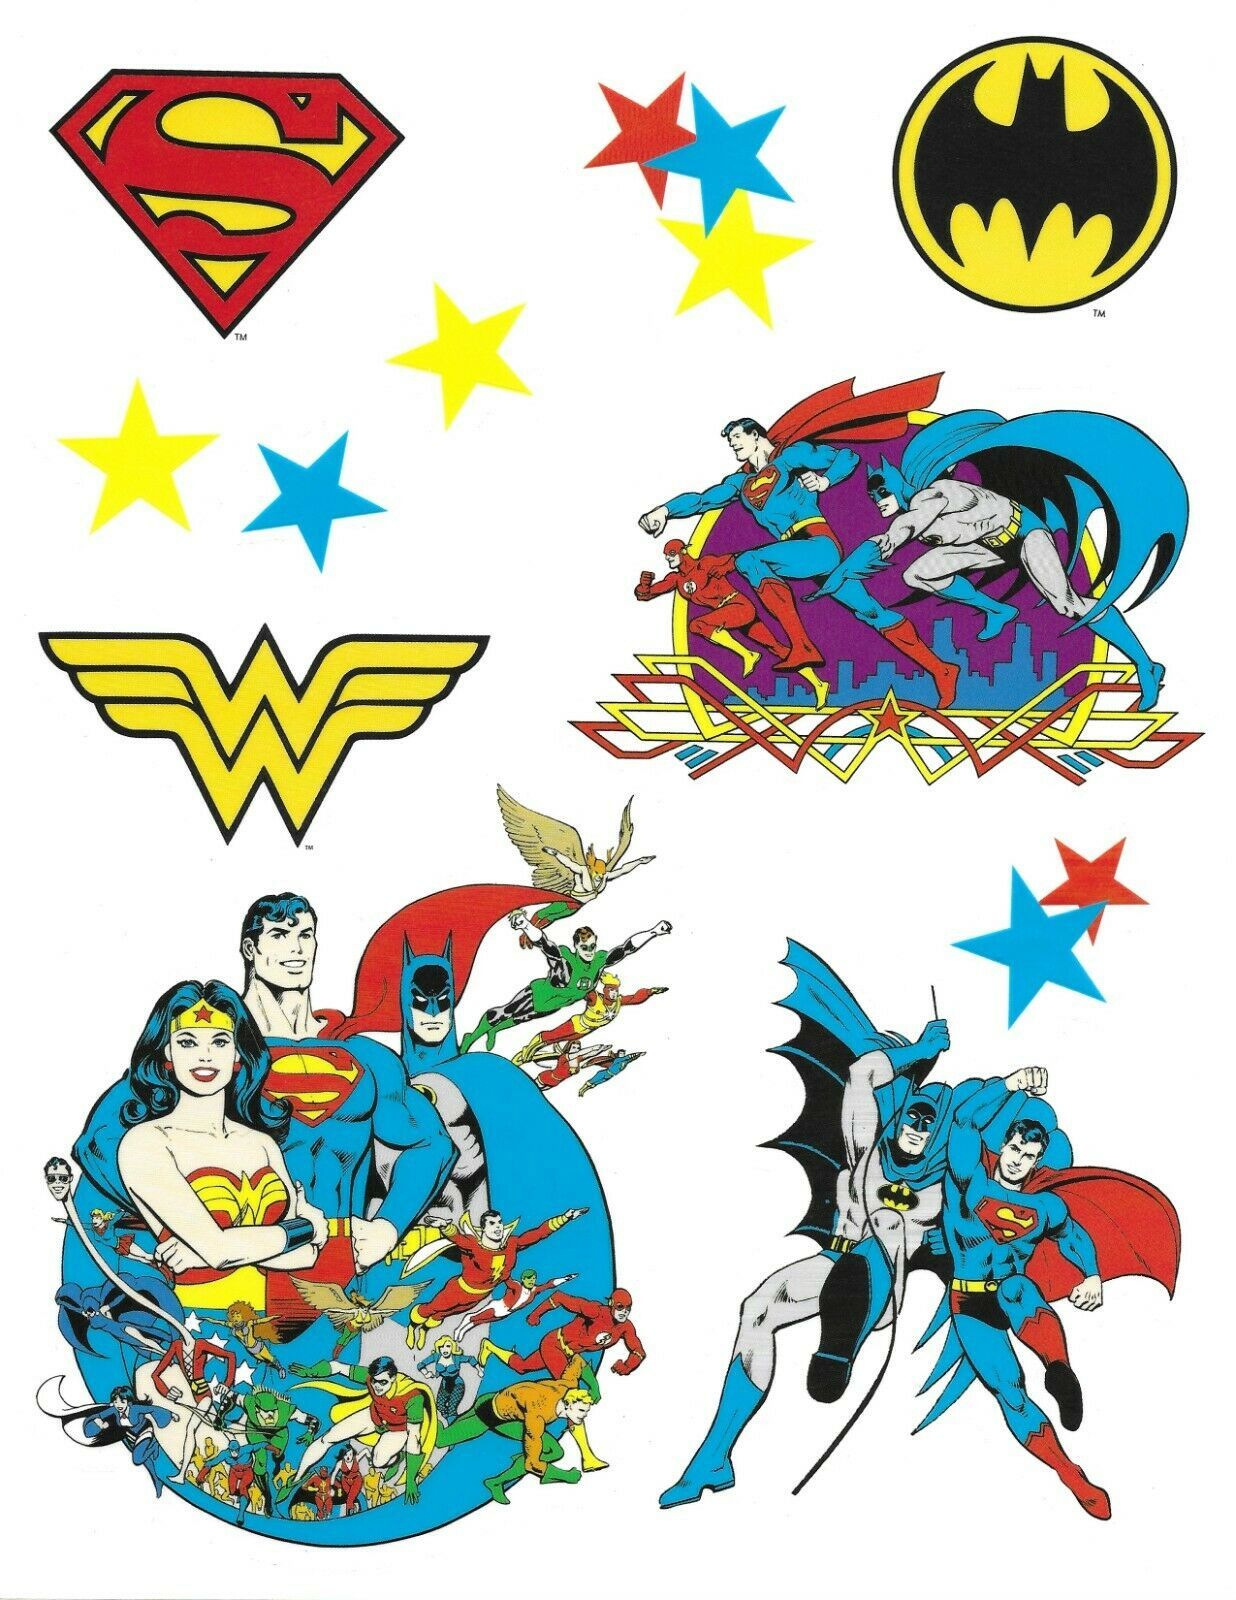 Roommates Justice League Wall Decal Set RMK3869SS - $8.90